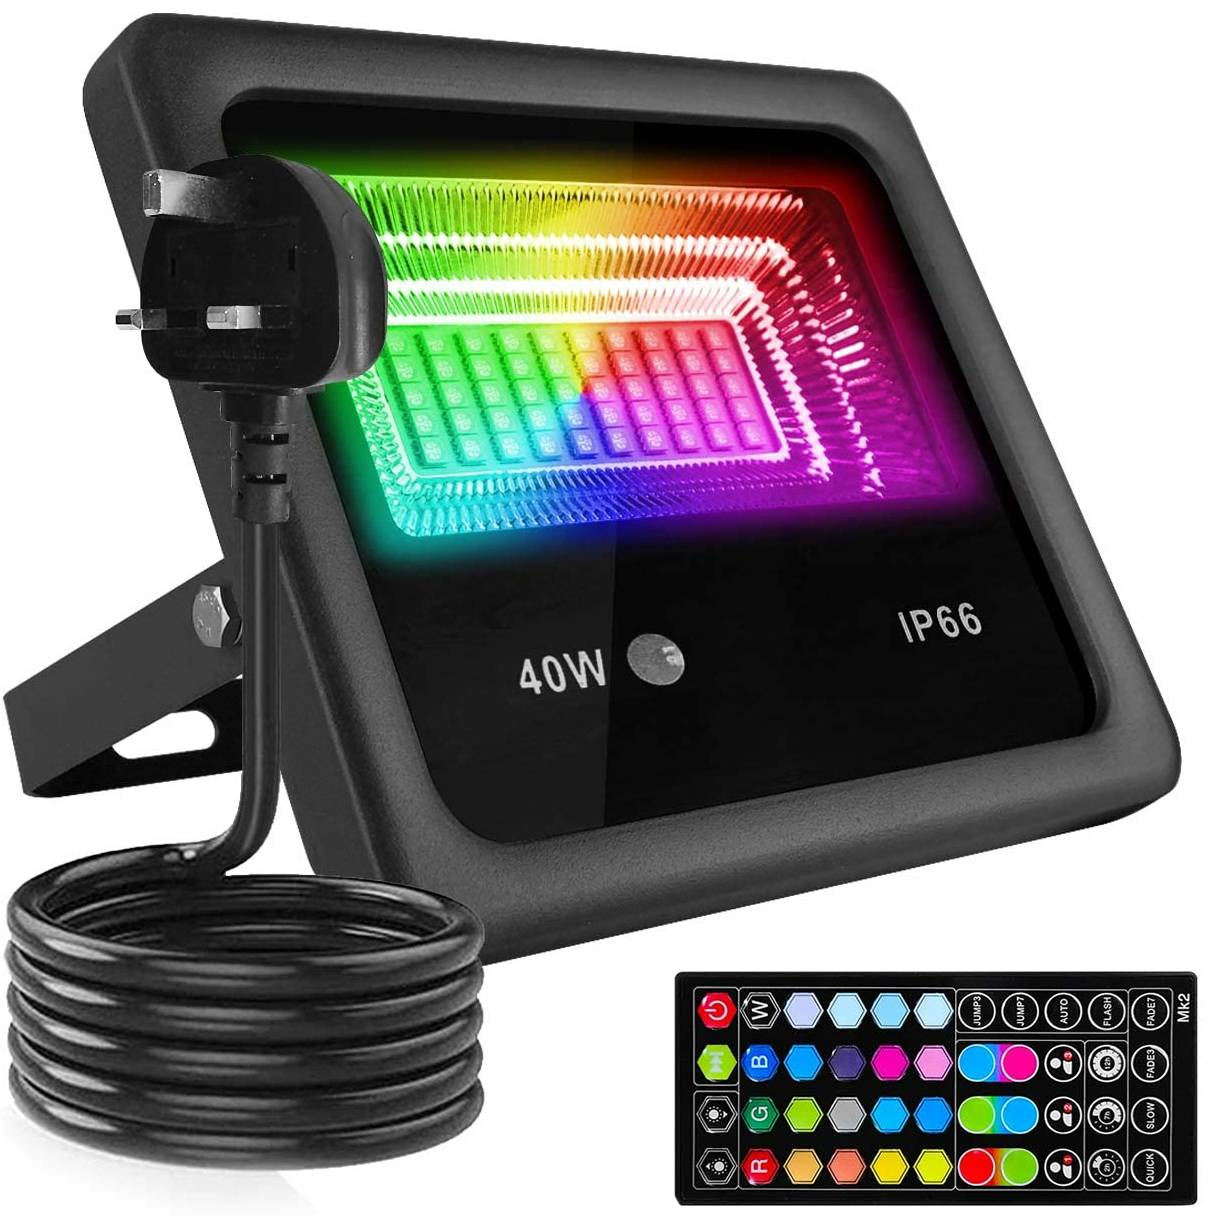 MECOLA RGB LED Floodlight Outdoor 40W with Remote Control, 4000LM IP66 Waterproof LED Flood Lights Outdoor, DIY 1000 Colours RGB Outdoor Floodlight, 6 Modes UK 3-Plug 60 LED Flood Light with 2m Wire